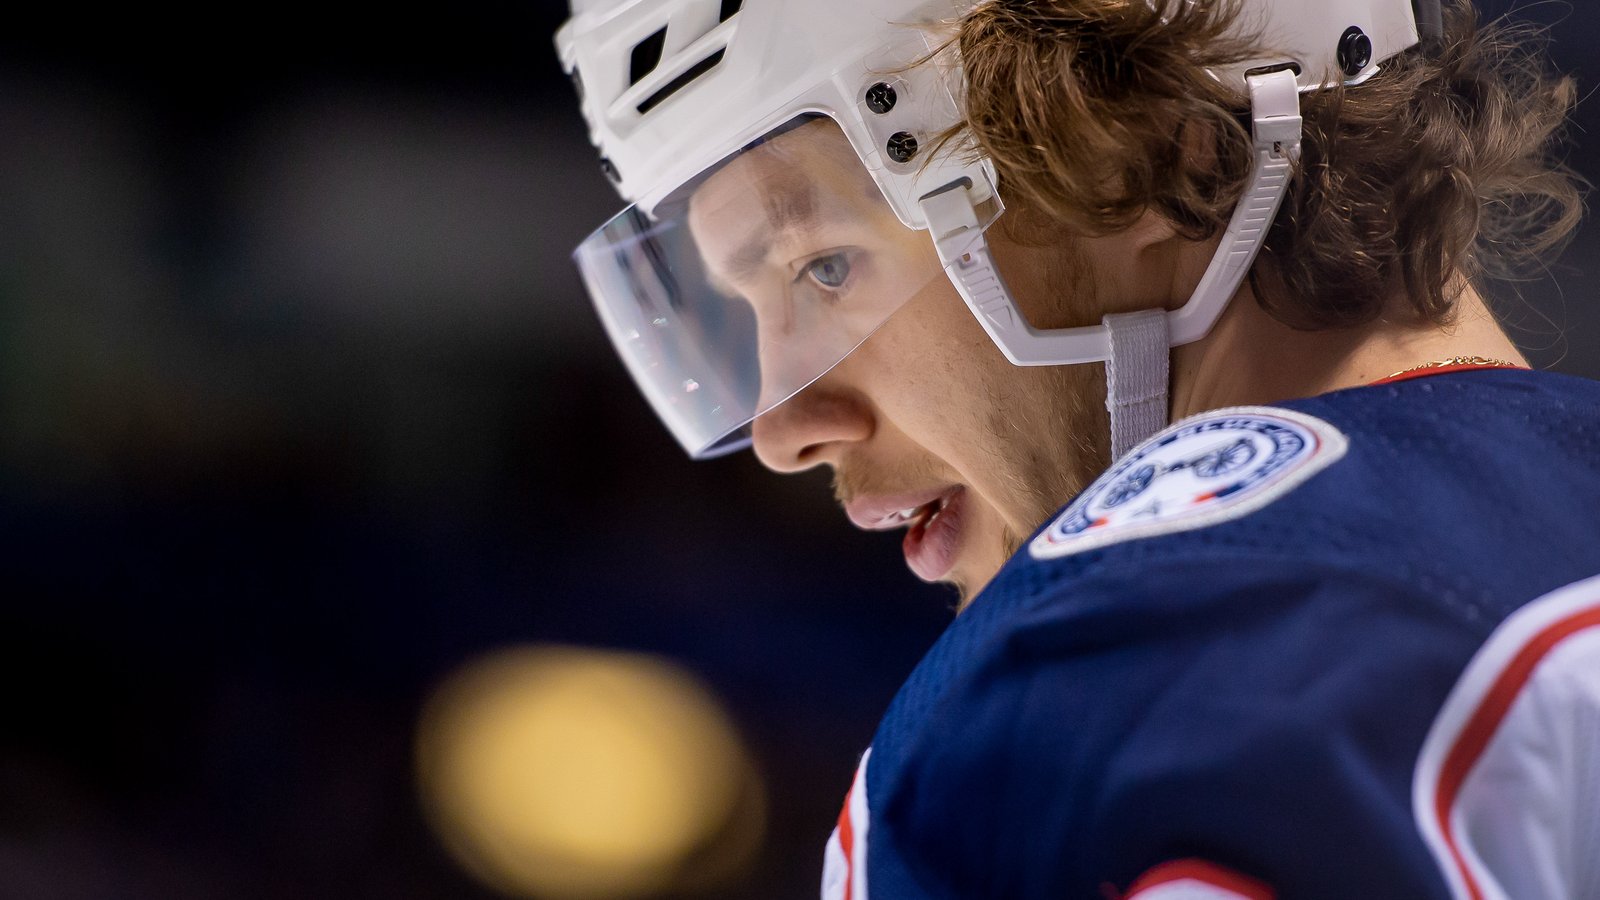 Breaking: Another team has entered the race for Artemi Panarin.